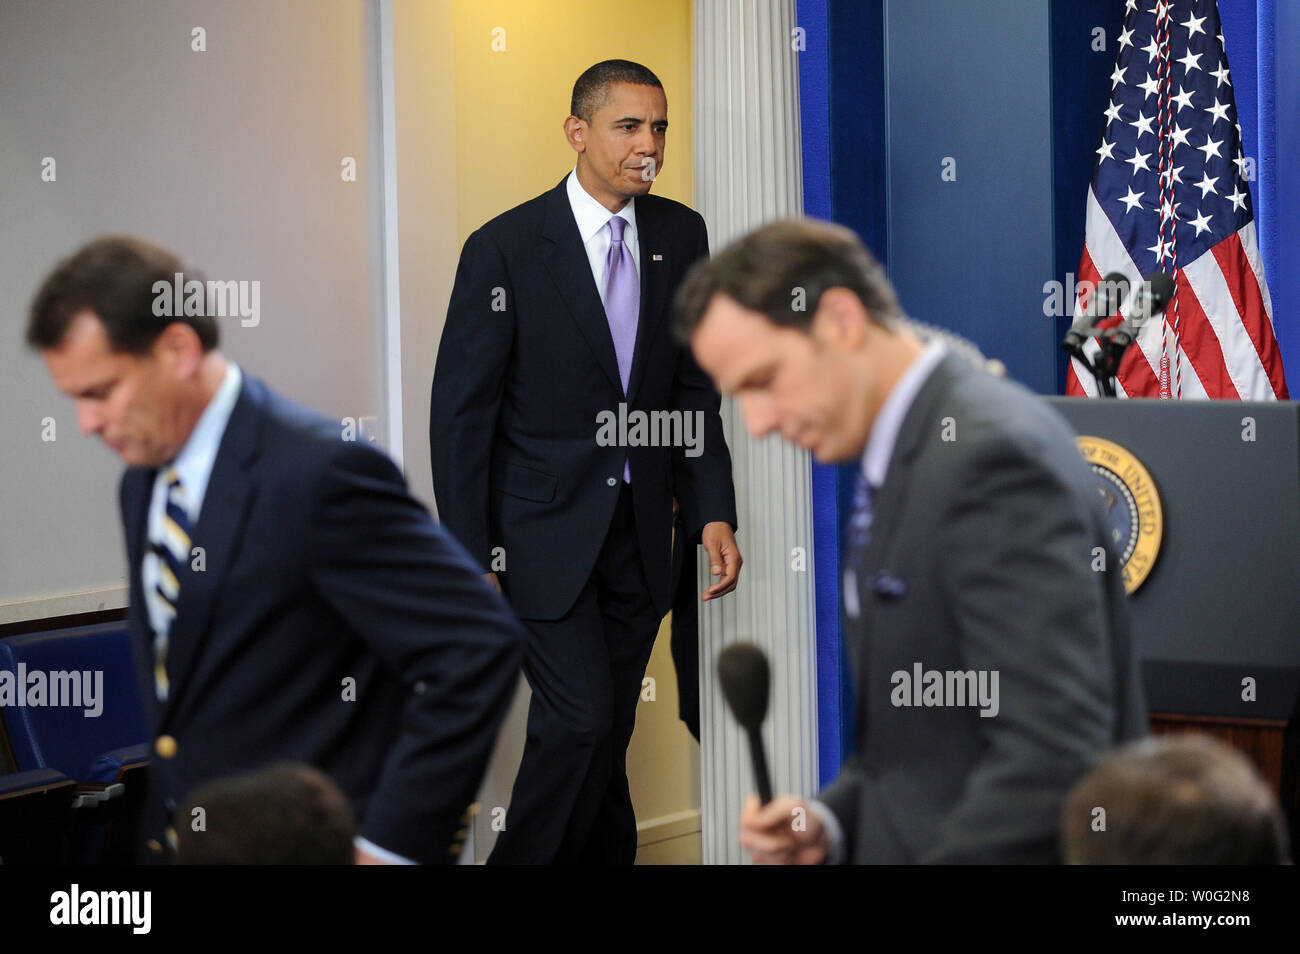 Reporters take their seats as U.S. President Barack Obama arrives to make a statement regarding bomb material found on cargo planes in the Brady Press Briefing Room of the White House in Washington on October 29, 2010.       UPI/Roger L. Wollenberg Stock Photo